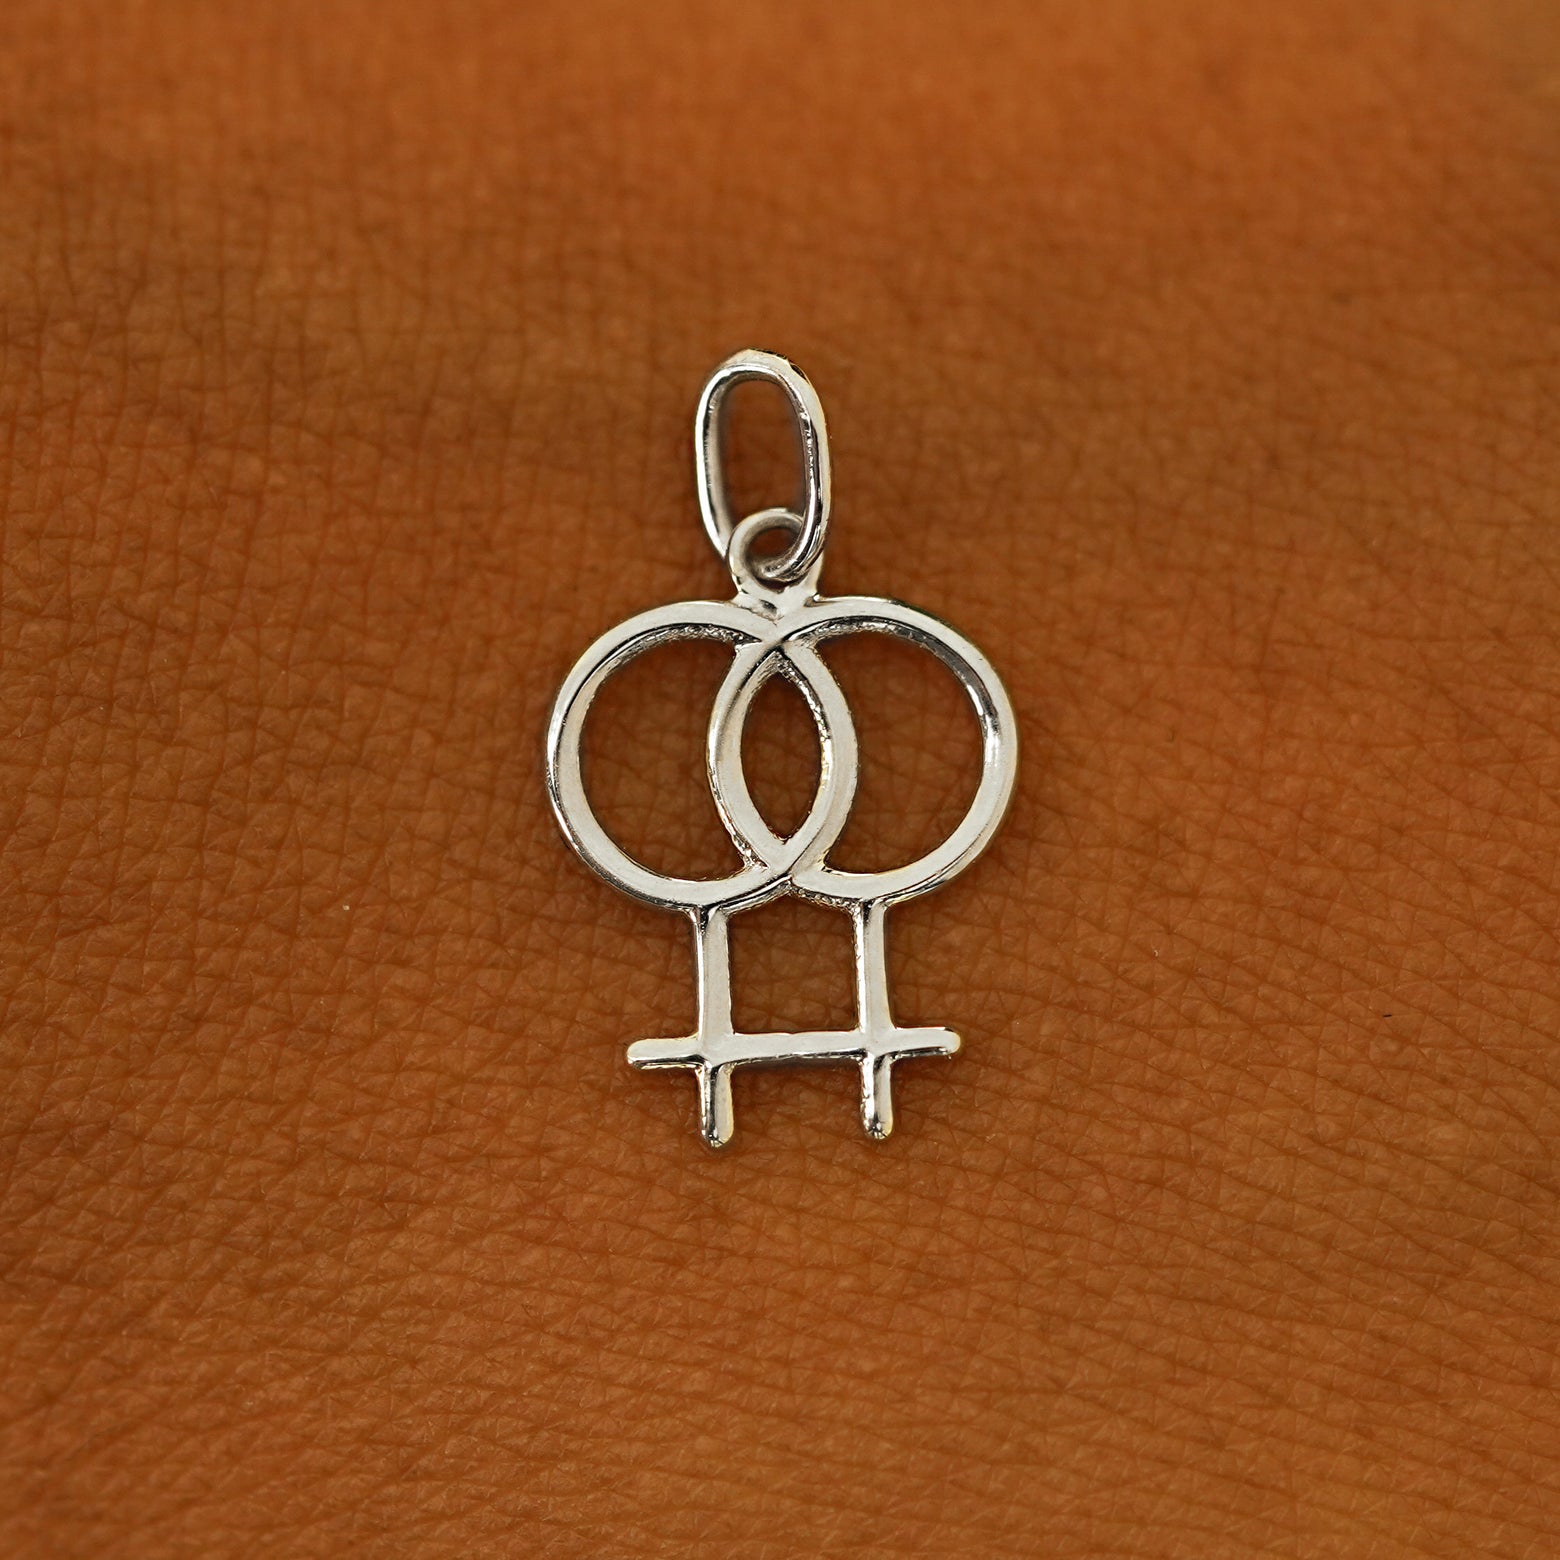 A solid 14k white gold Lesbian Symbol Charm resting on the back of a model's hand